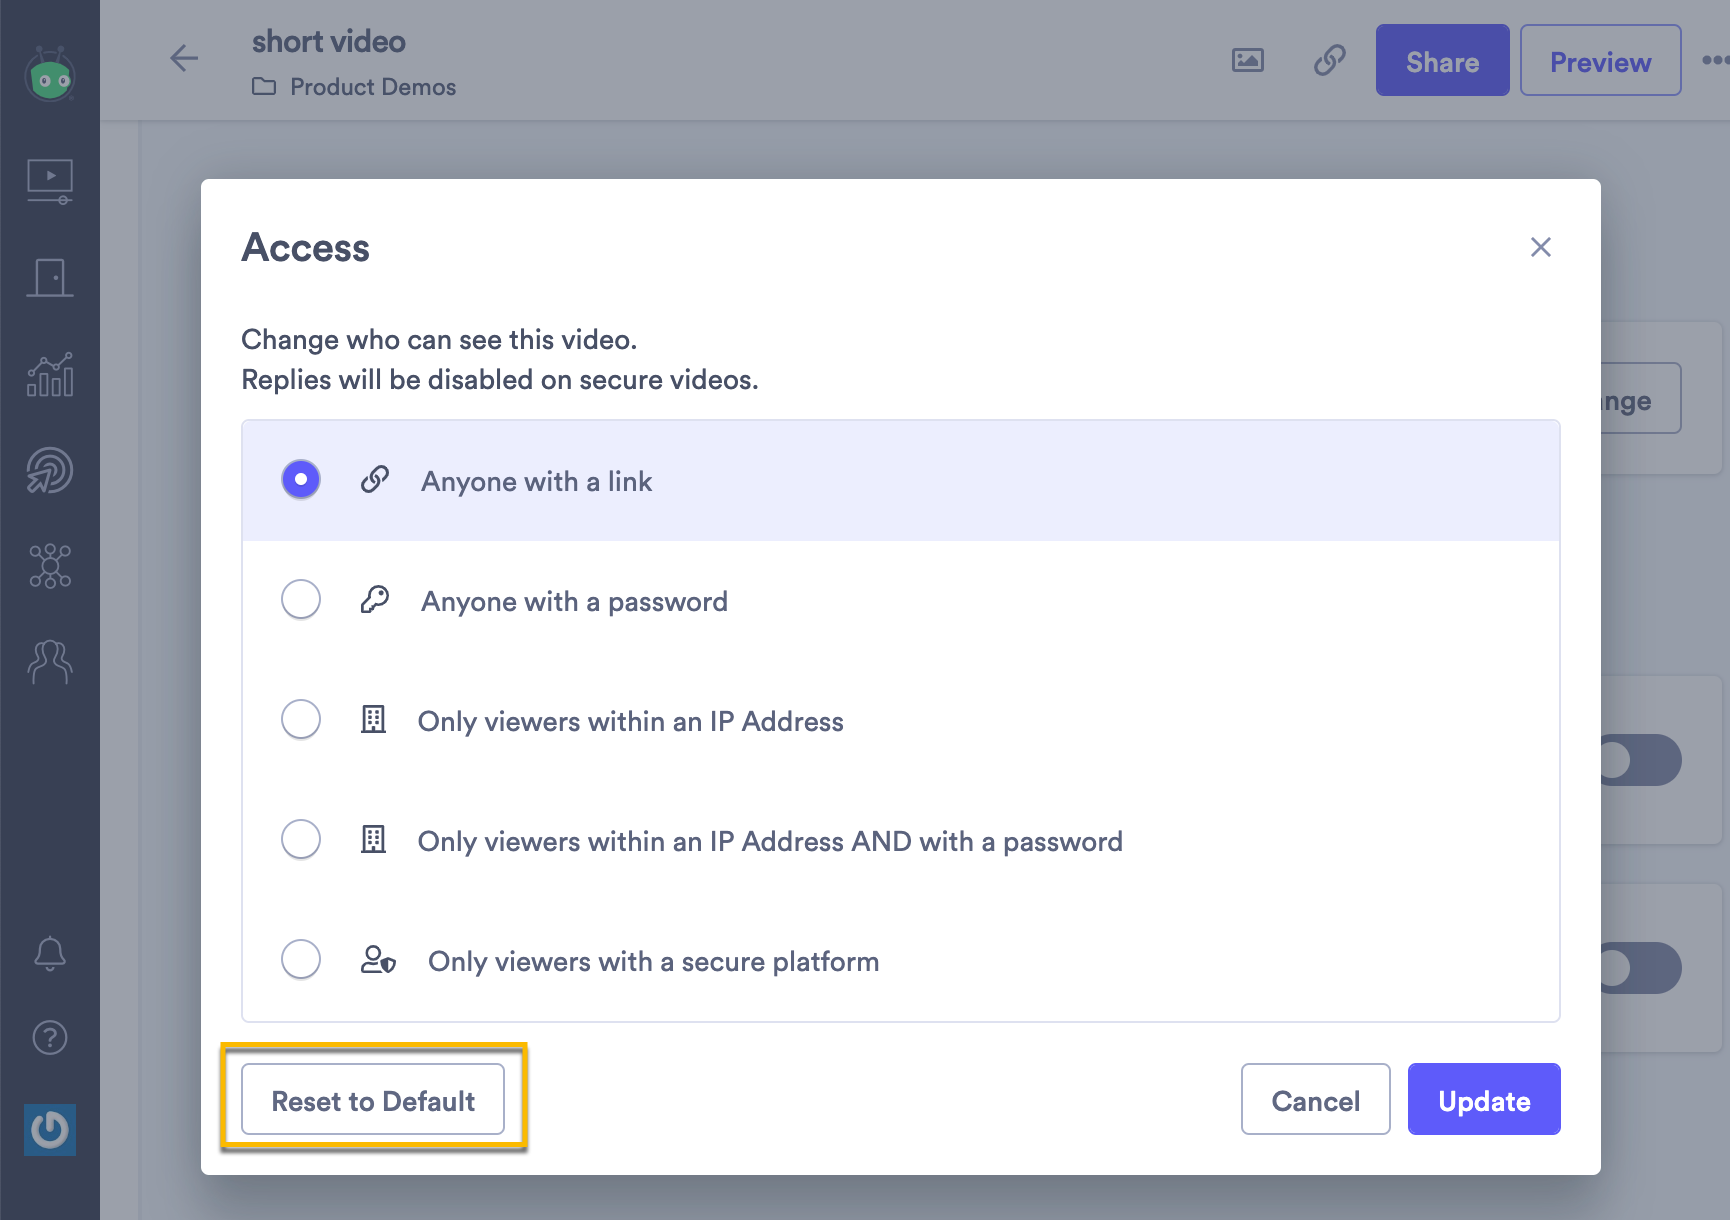 Opening a video's access settings, then selecting Reset to Default